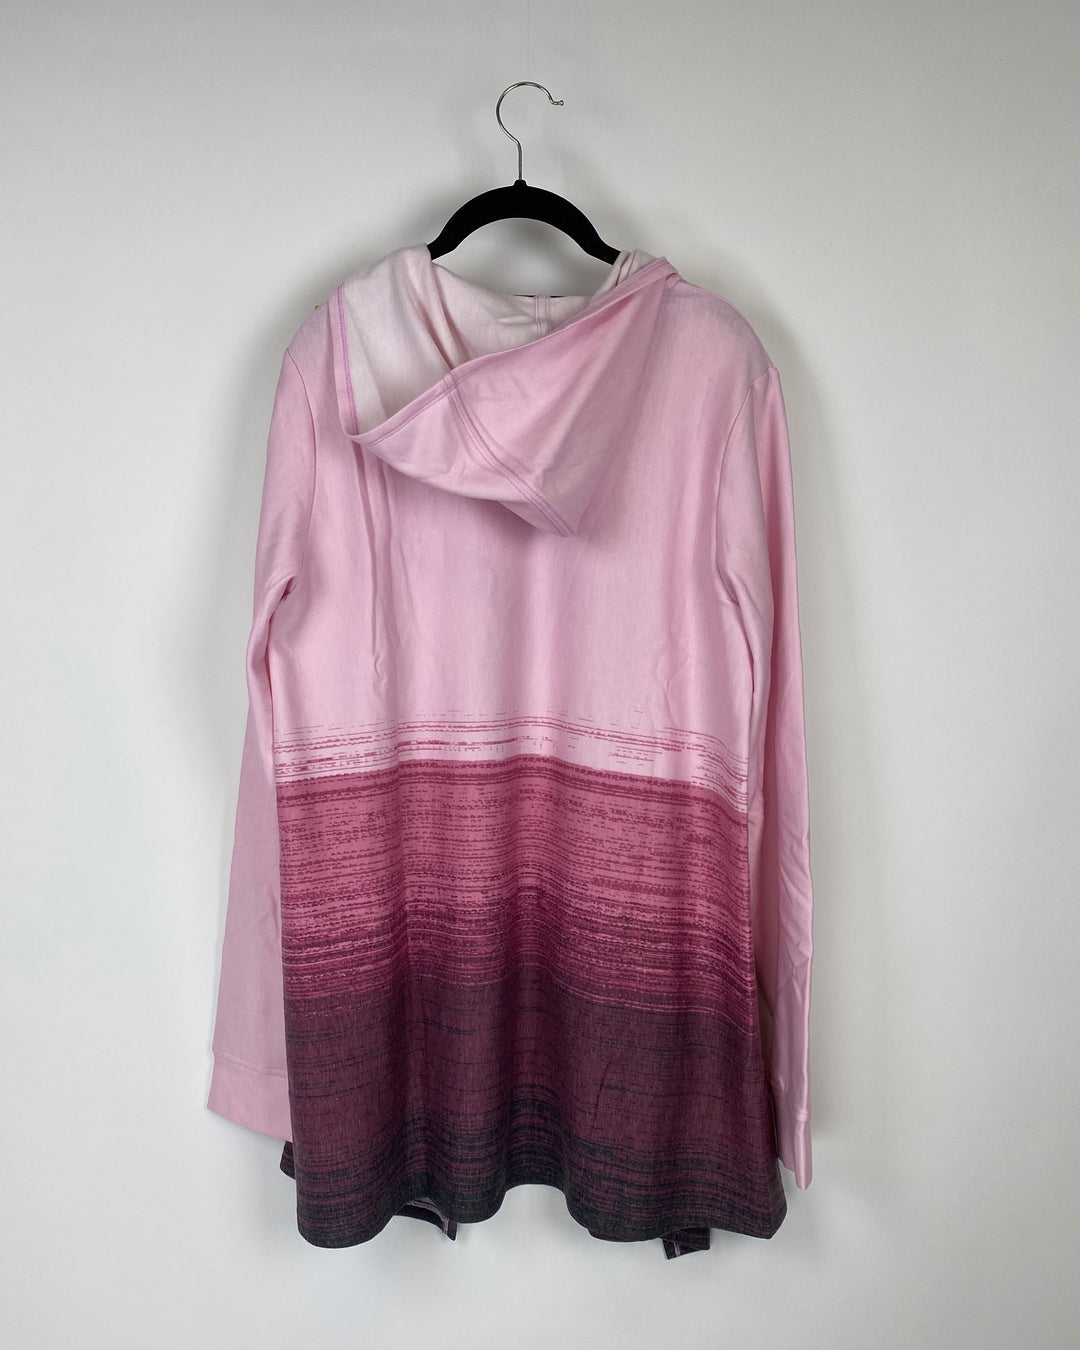 Pink Ombre Cardigan - Extra Small, Small and Medium